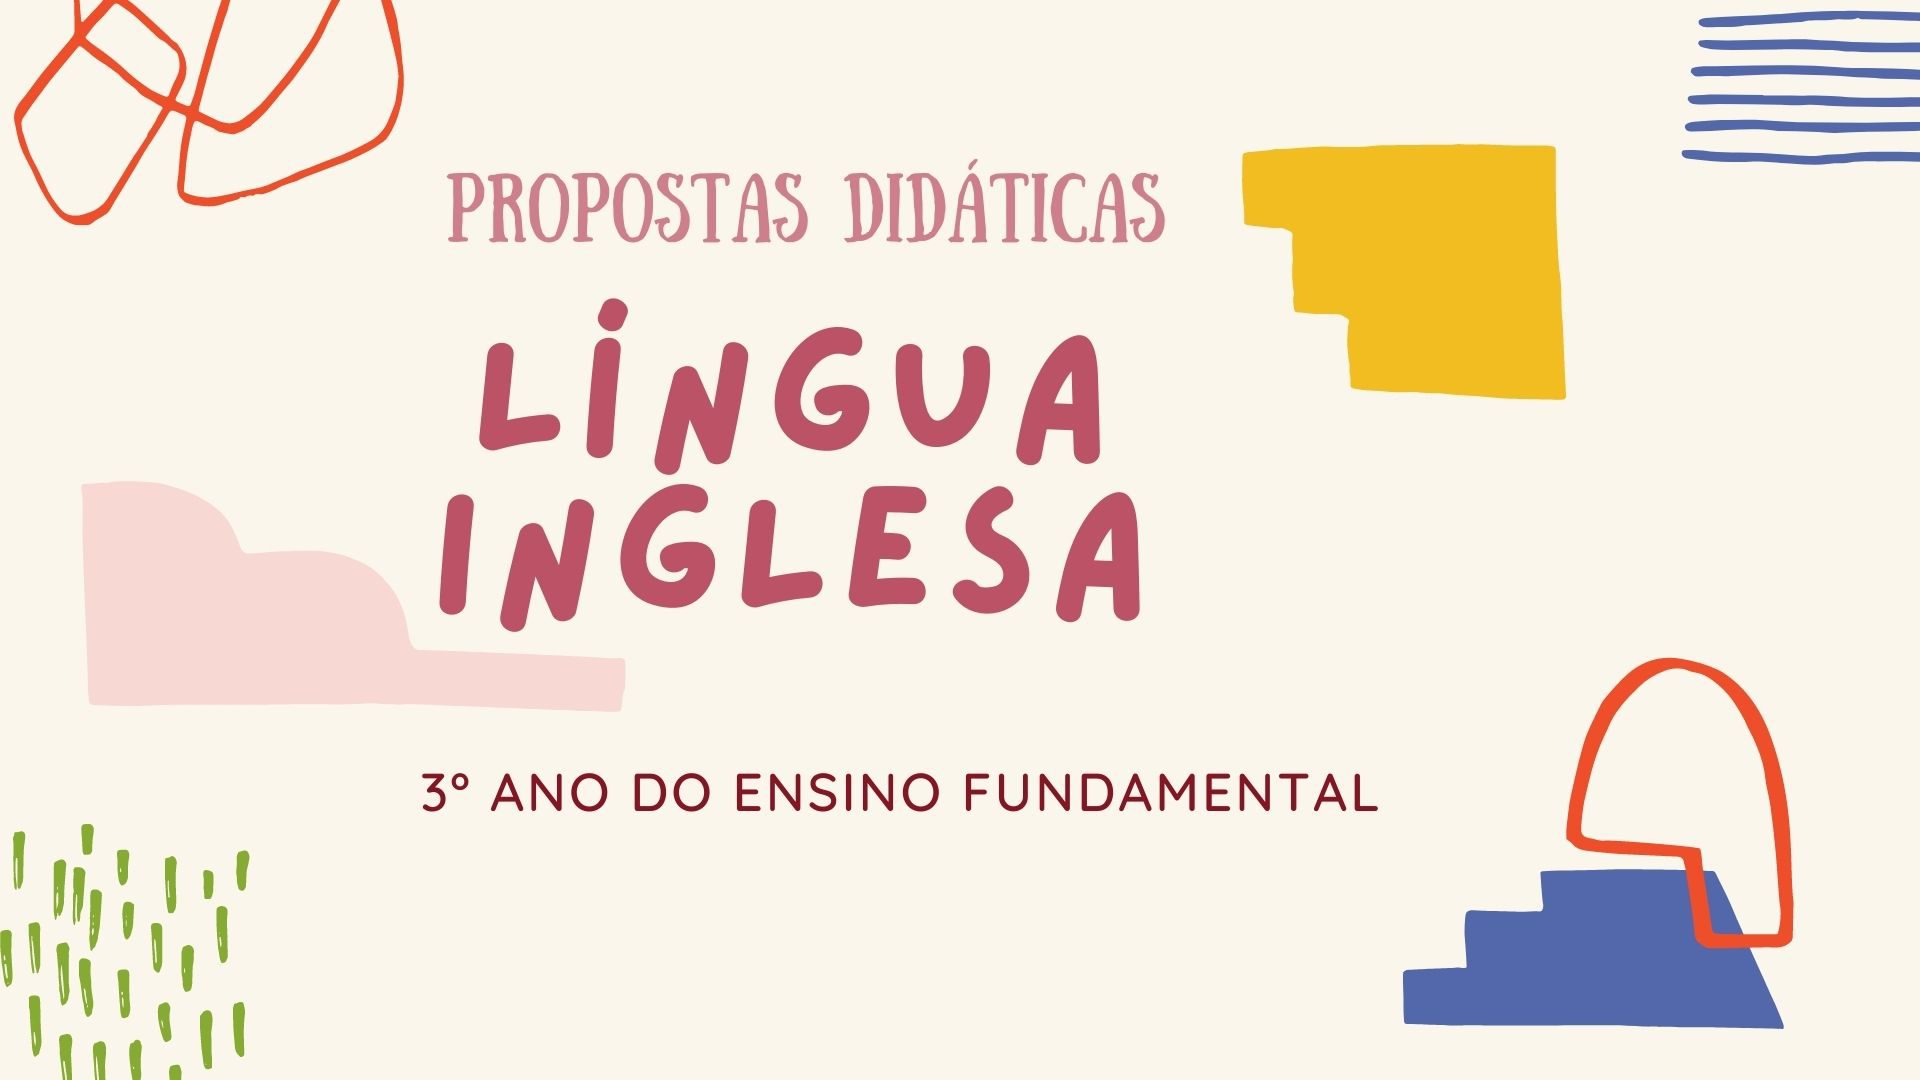 You are currently viewing Propostas didáticas – Língua Inglesa – 3º ano